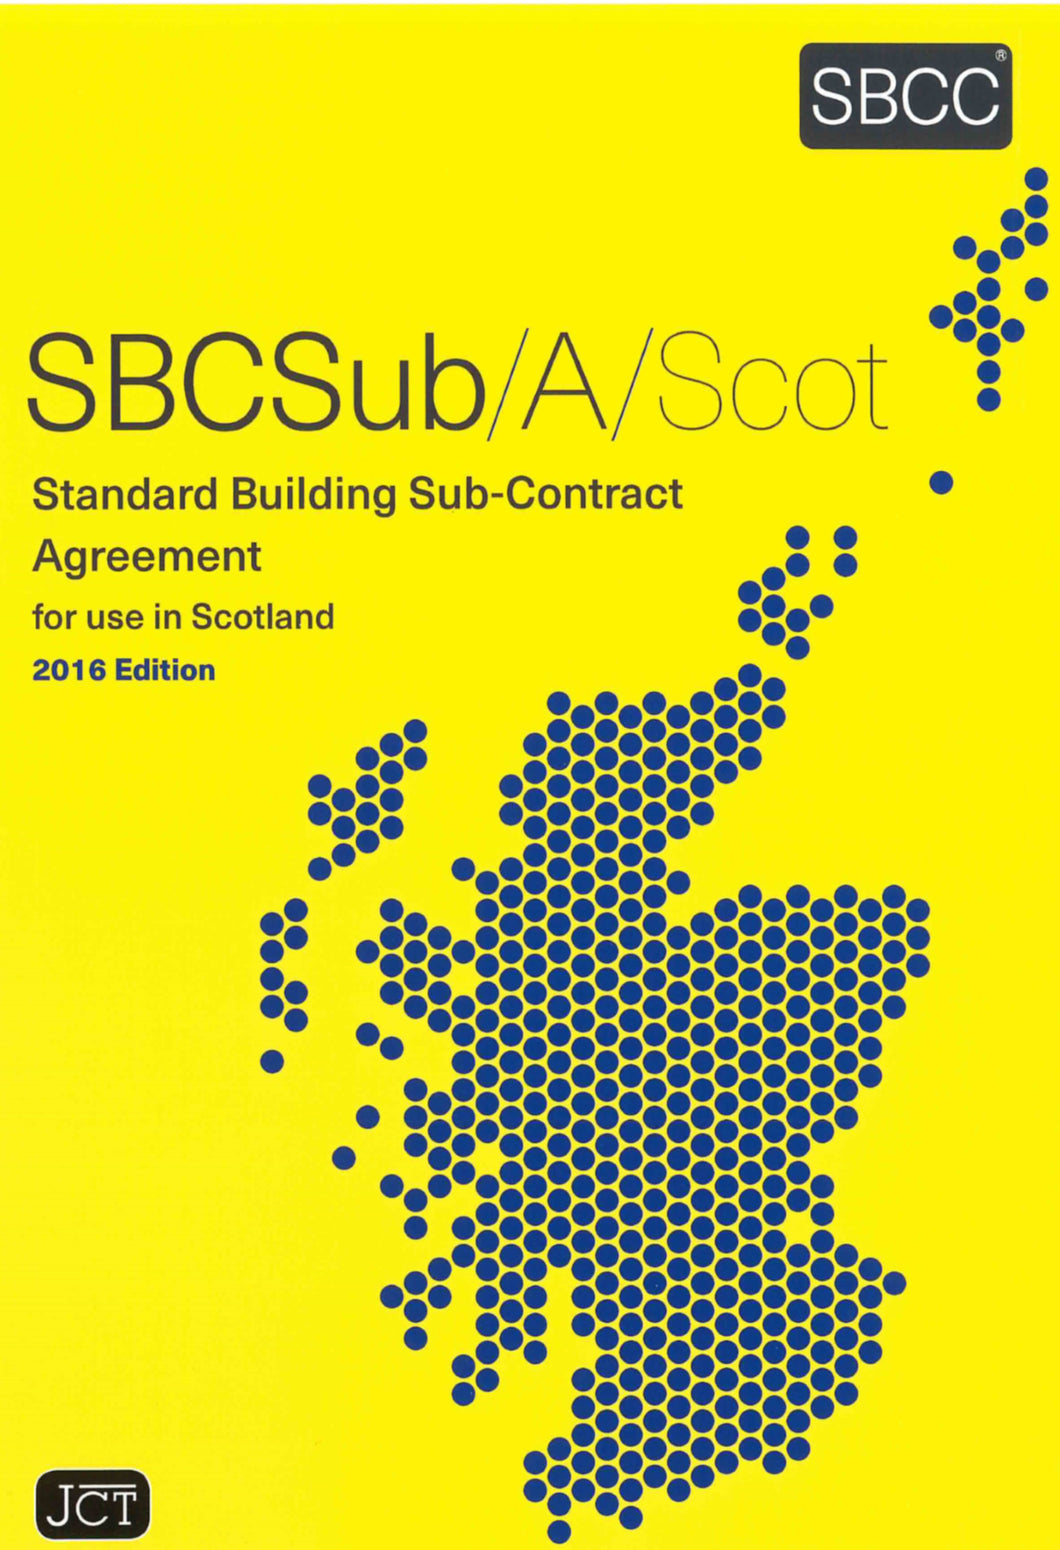 Standard Building Sub-Contract Agreement for use in Scotland 2016